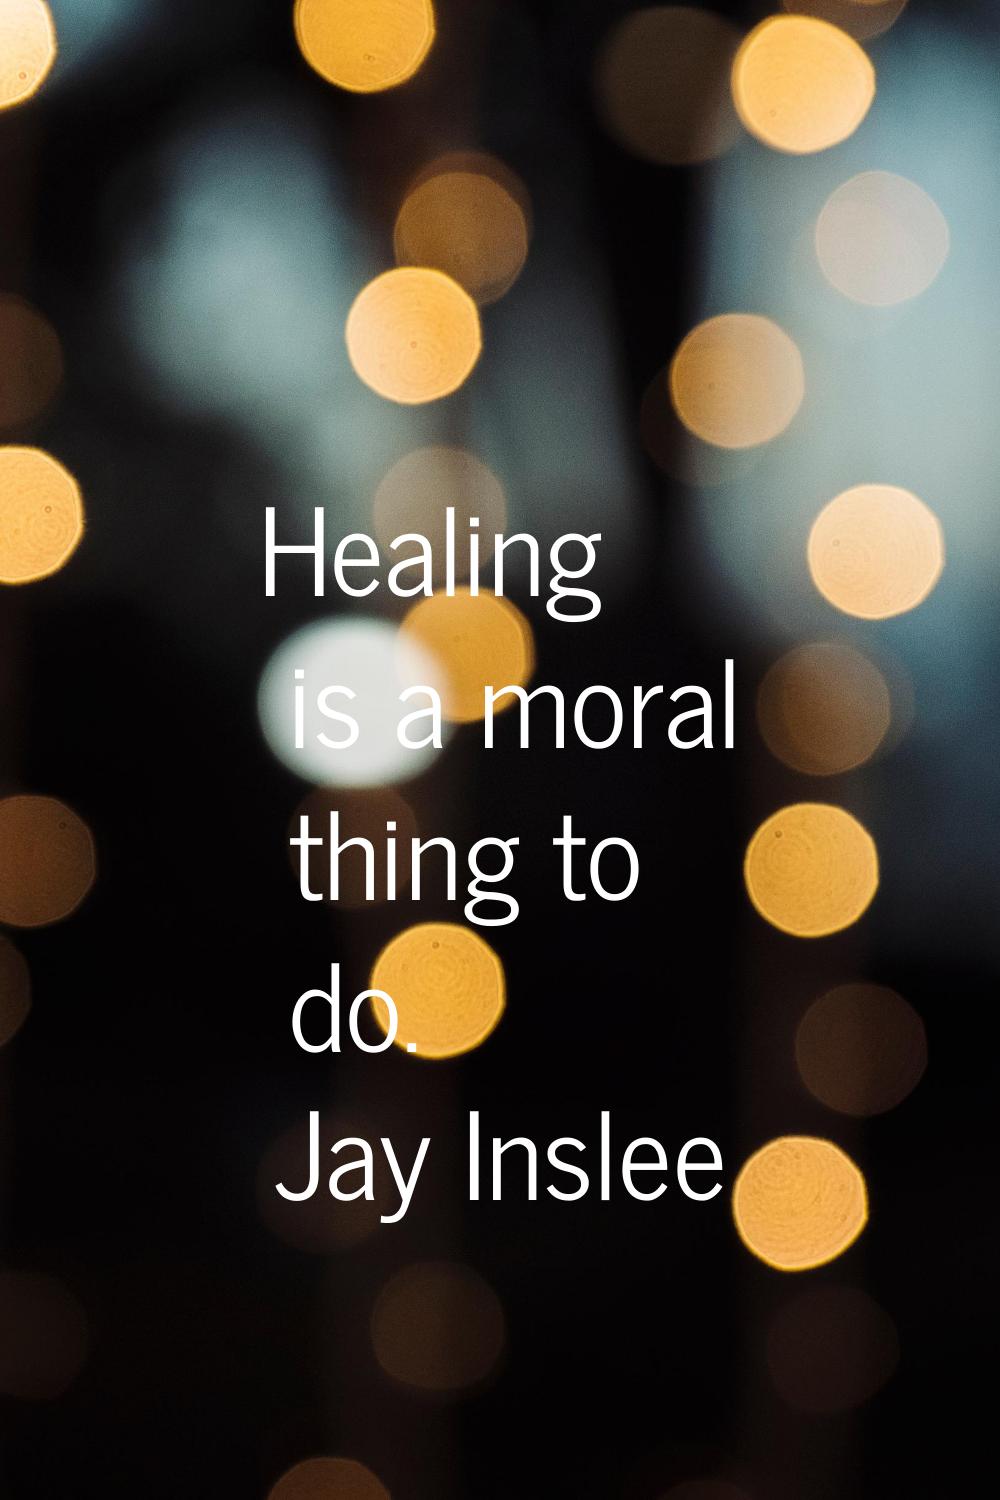 Healing is a moral thing to do.